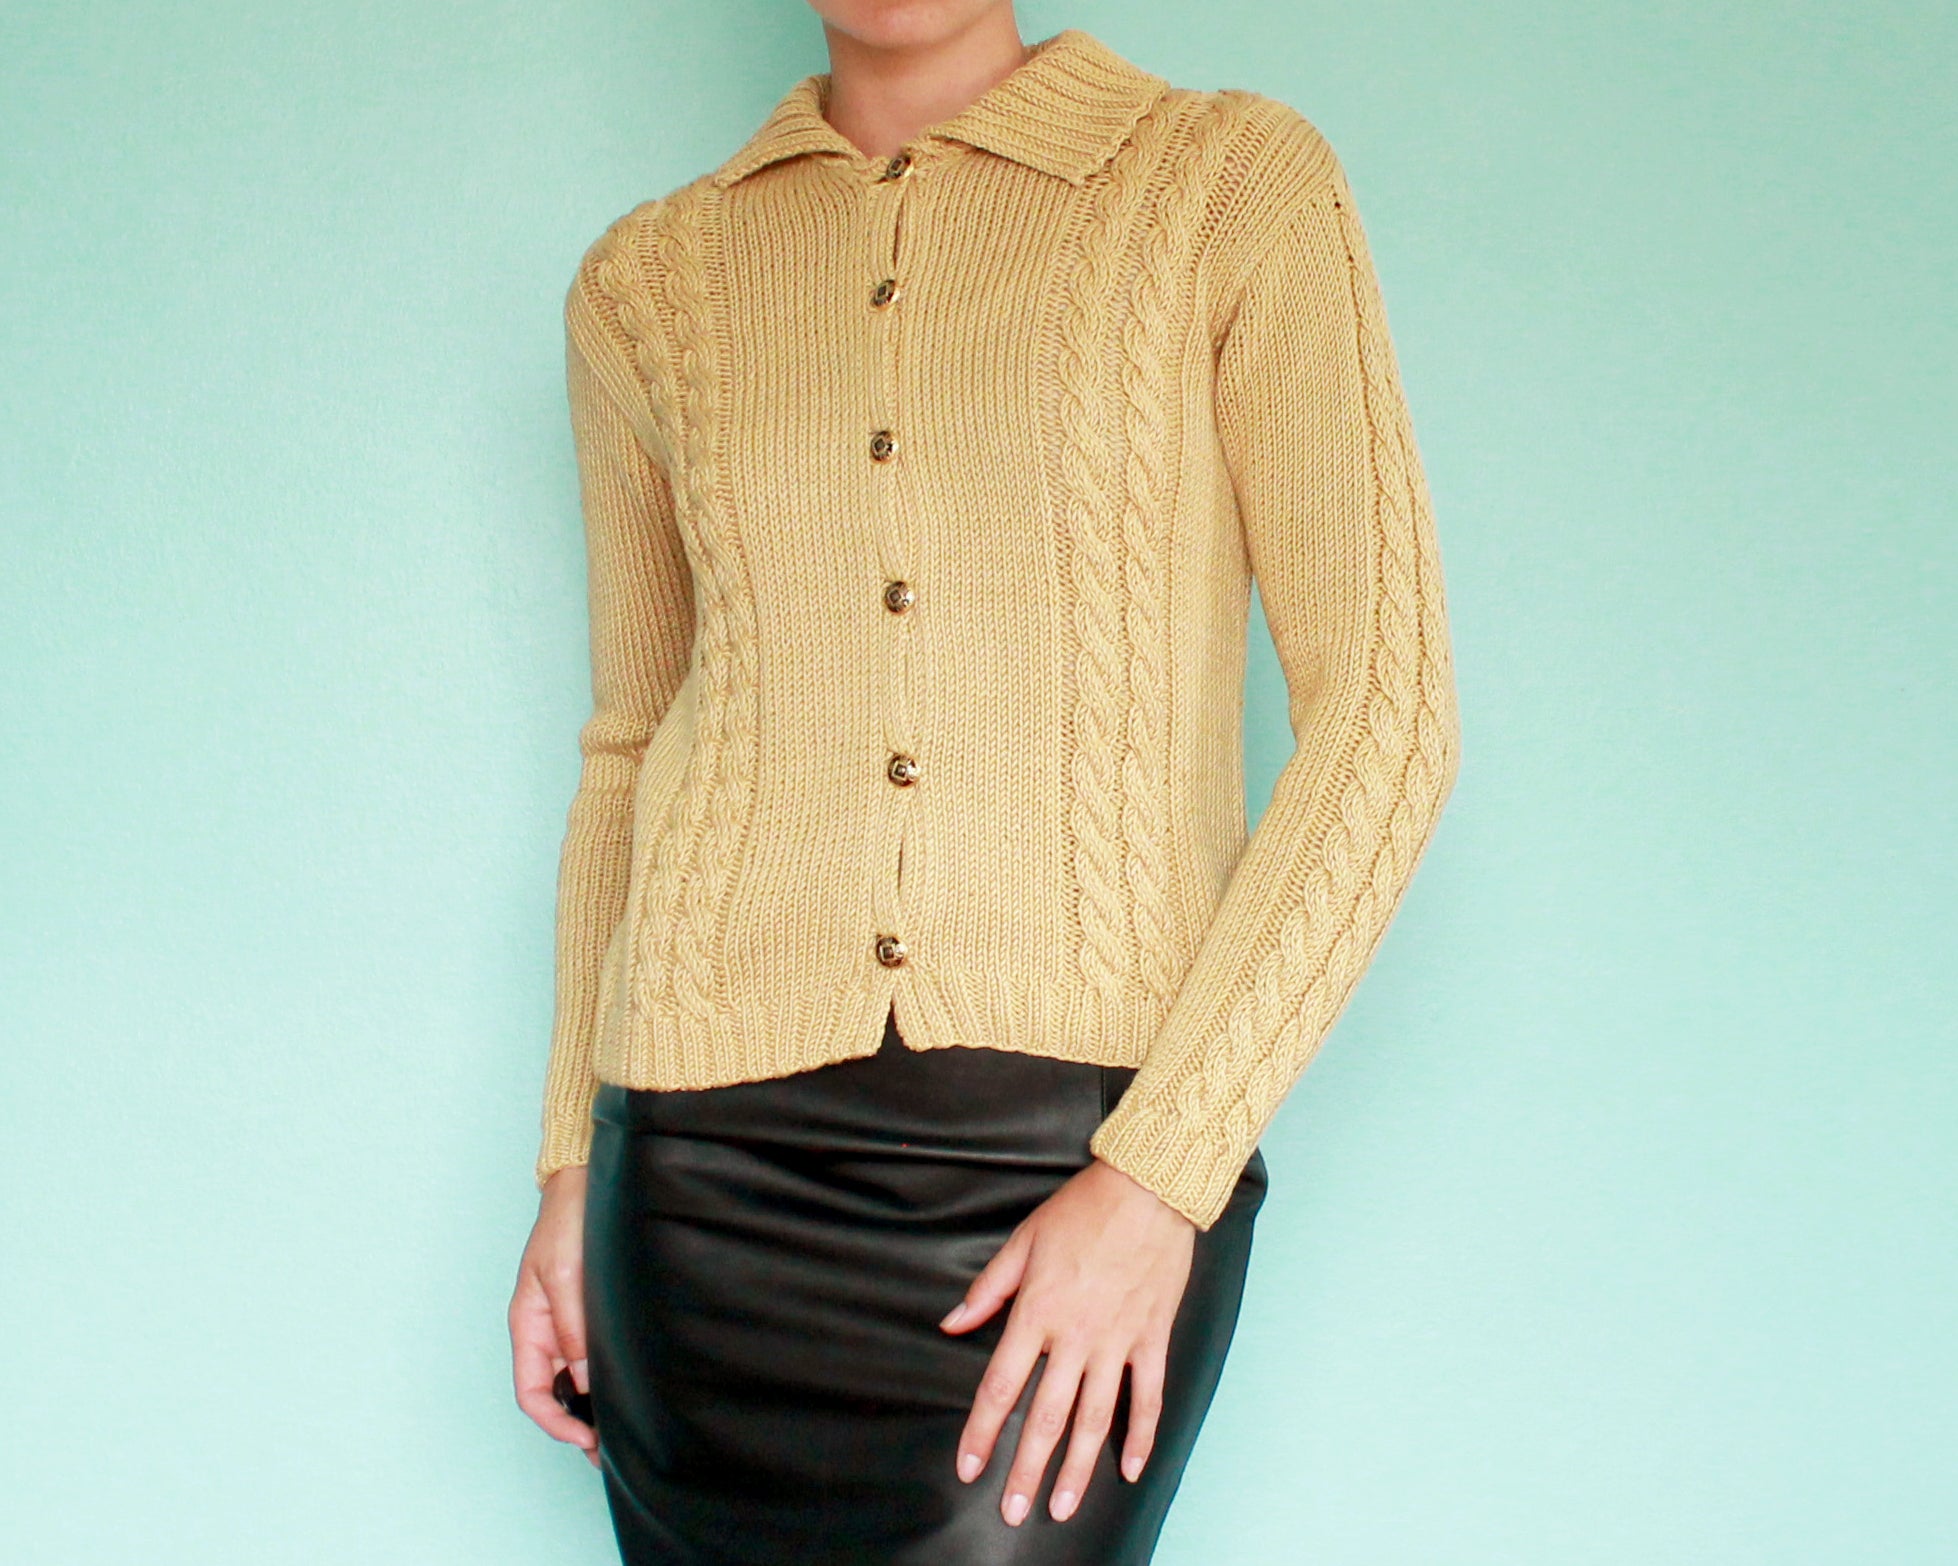 Handmade cotton cable knit cardigan in gold, women's medium 